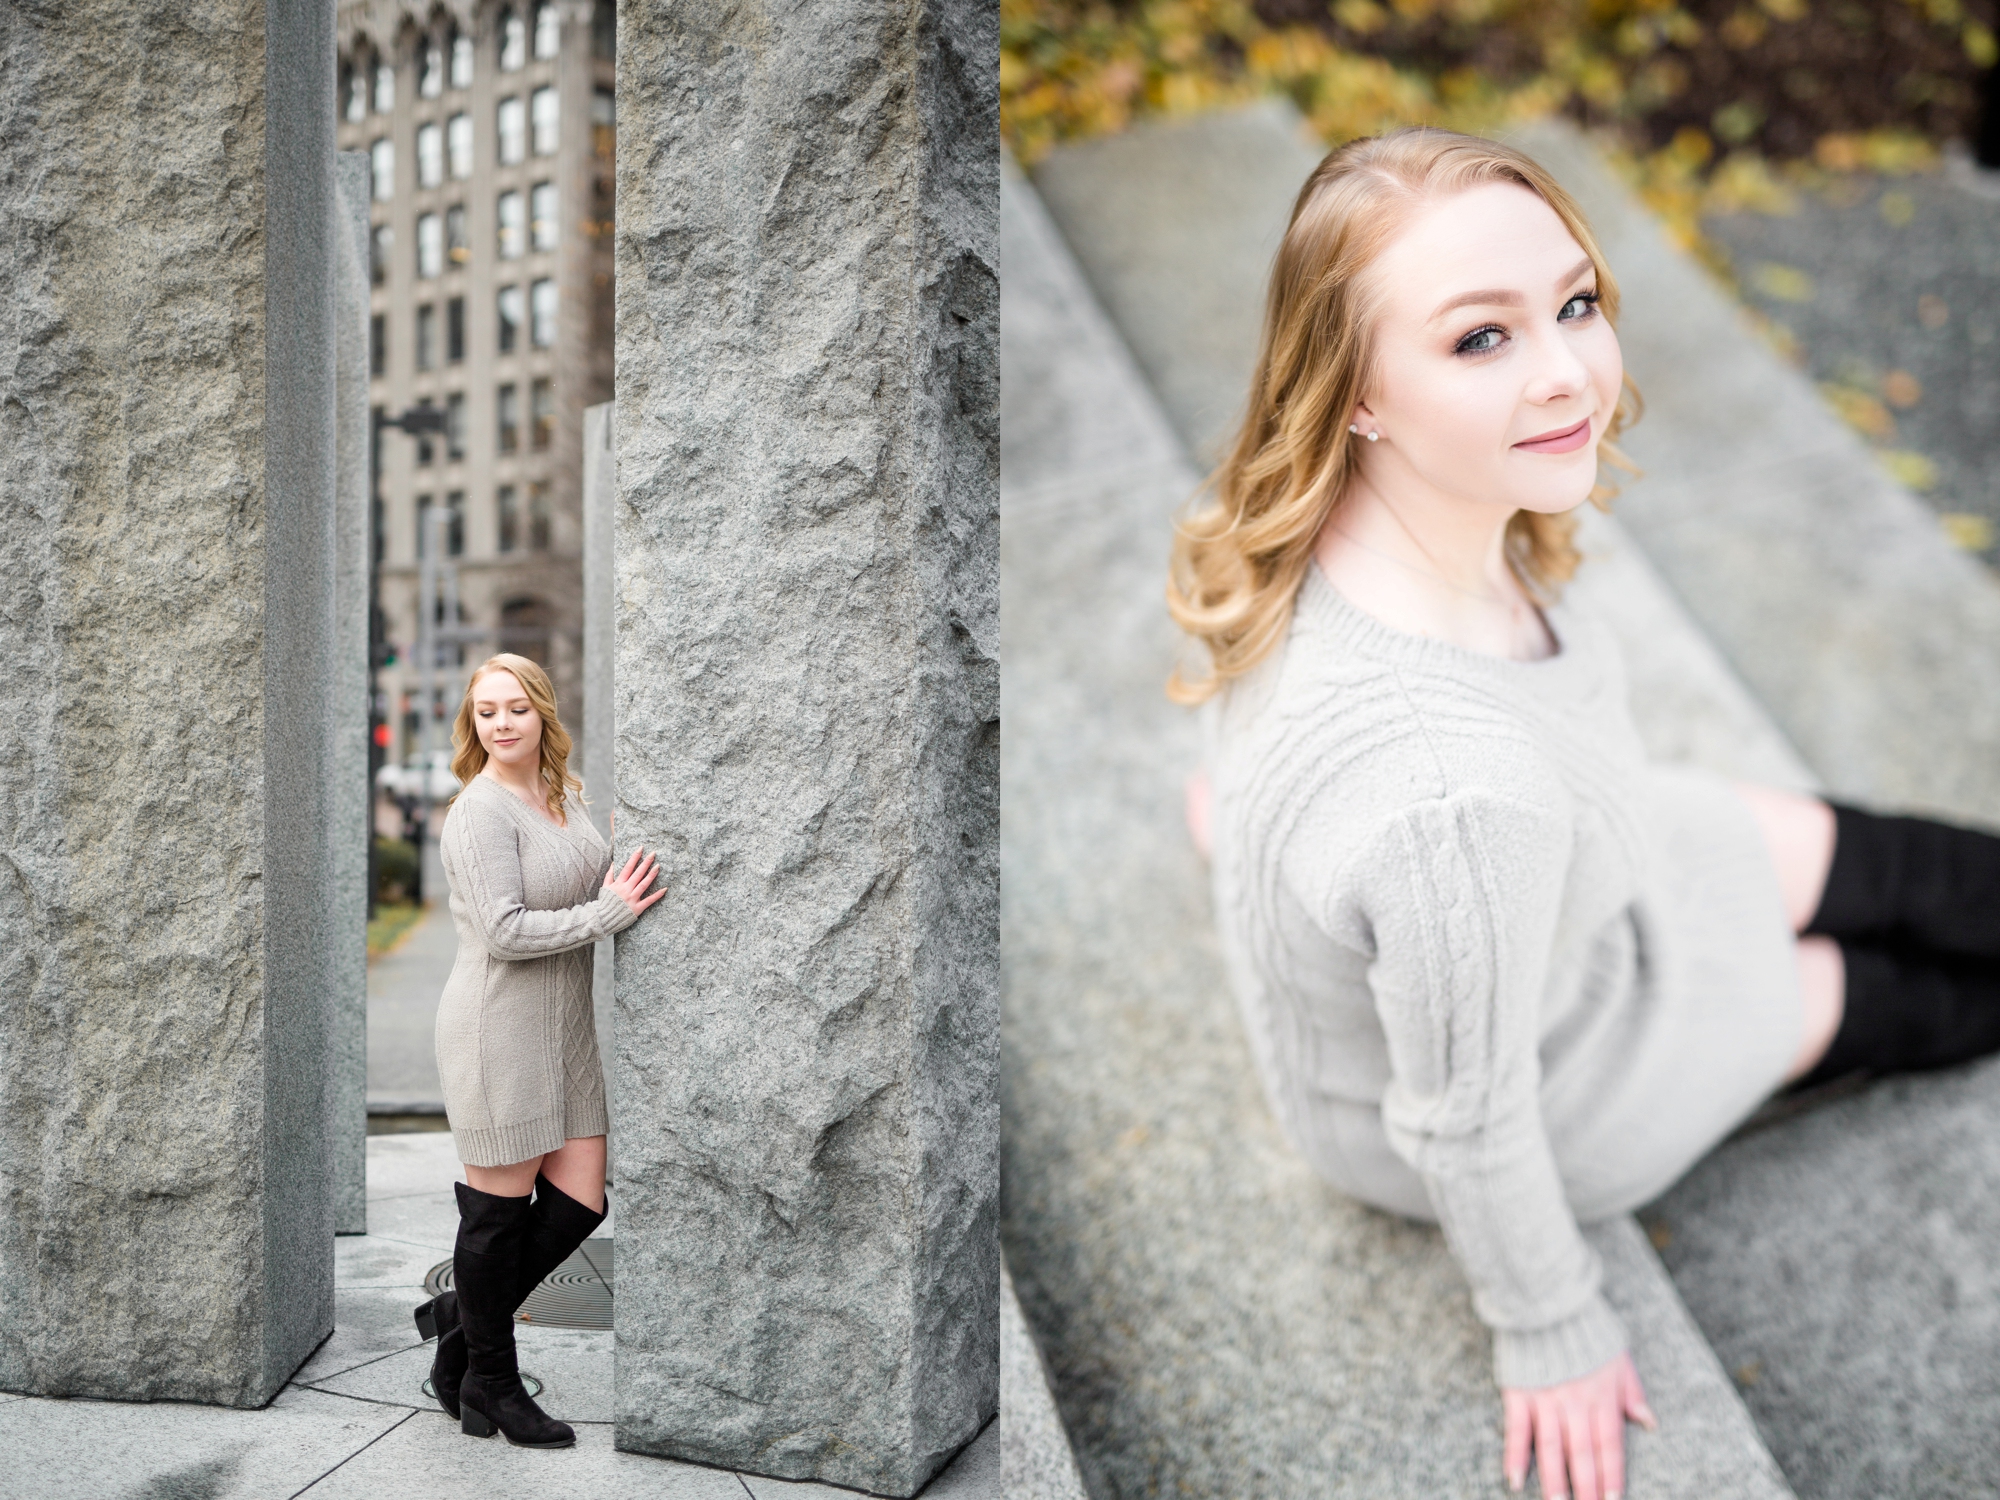 pittsburgh senior pictures, downtown pittsburgh senior photos, pittsburgh senior photographer, cranberry township senior photographer